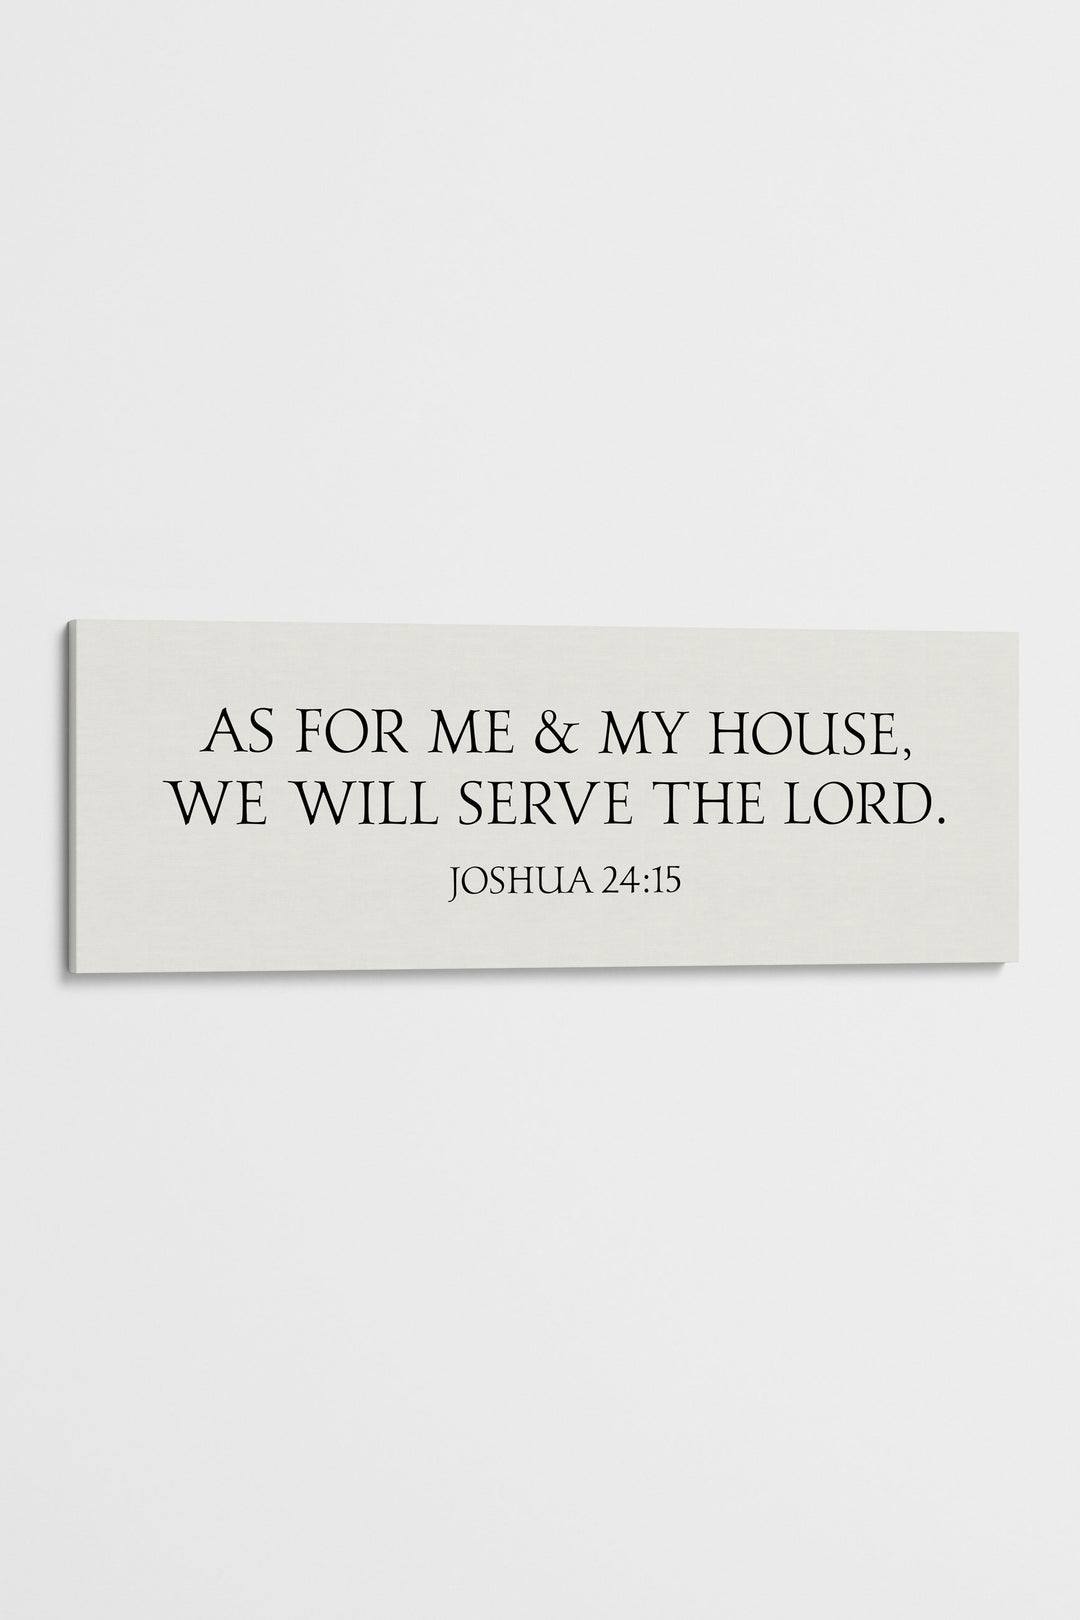 We Will Serve the Lord, Joshua 24:15